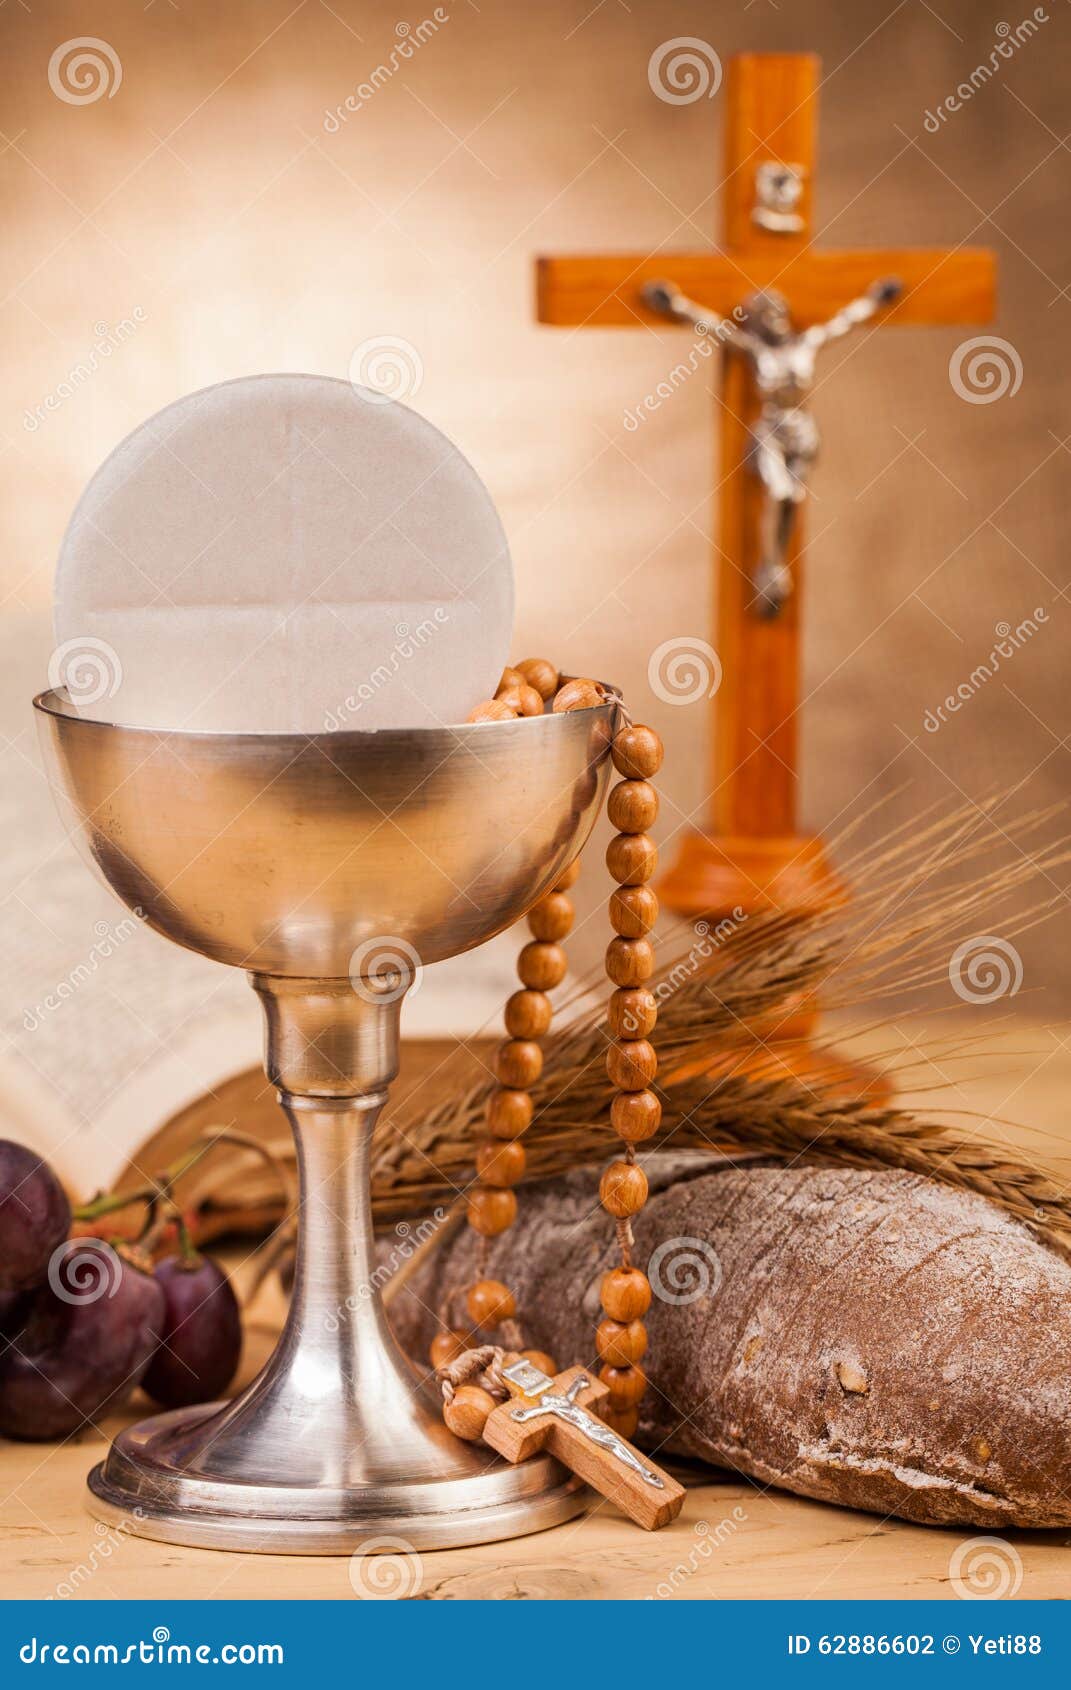 Holy communion composition stock photo. Image of bread ...